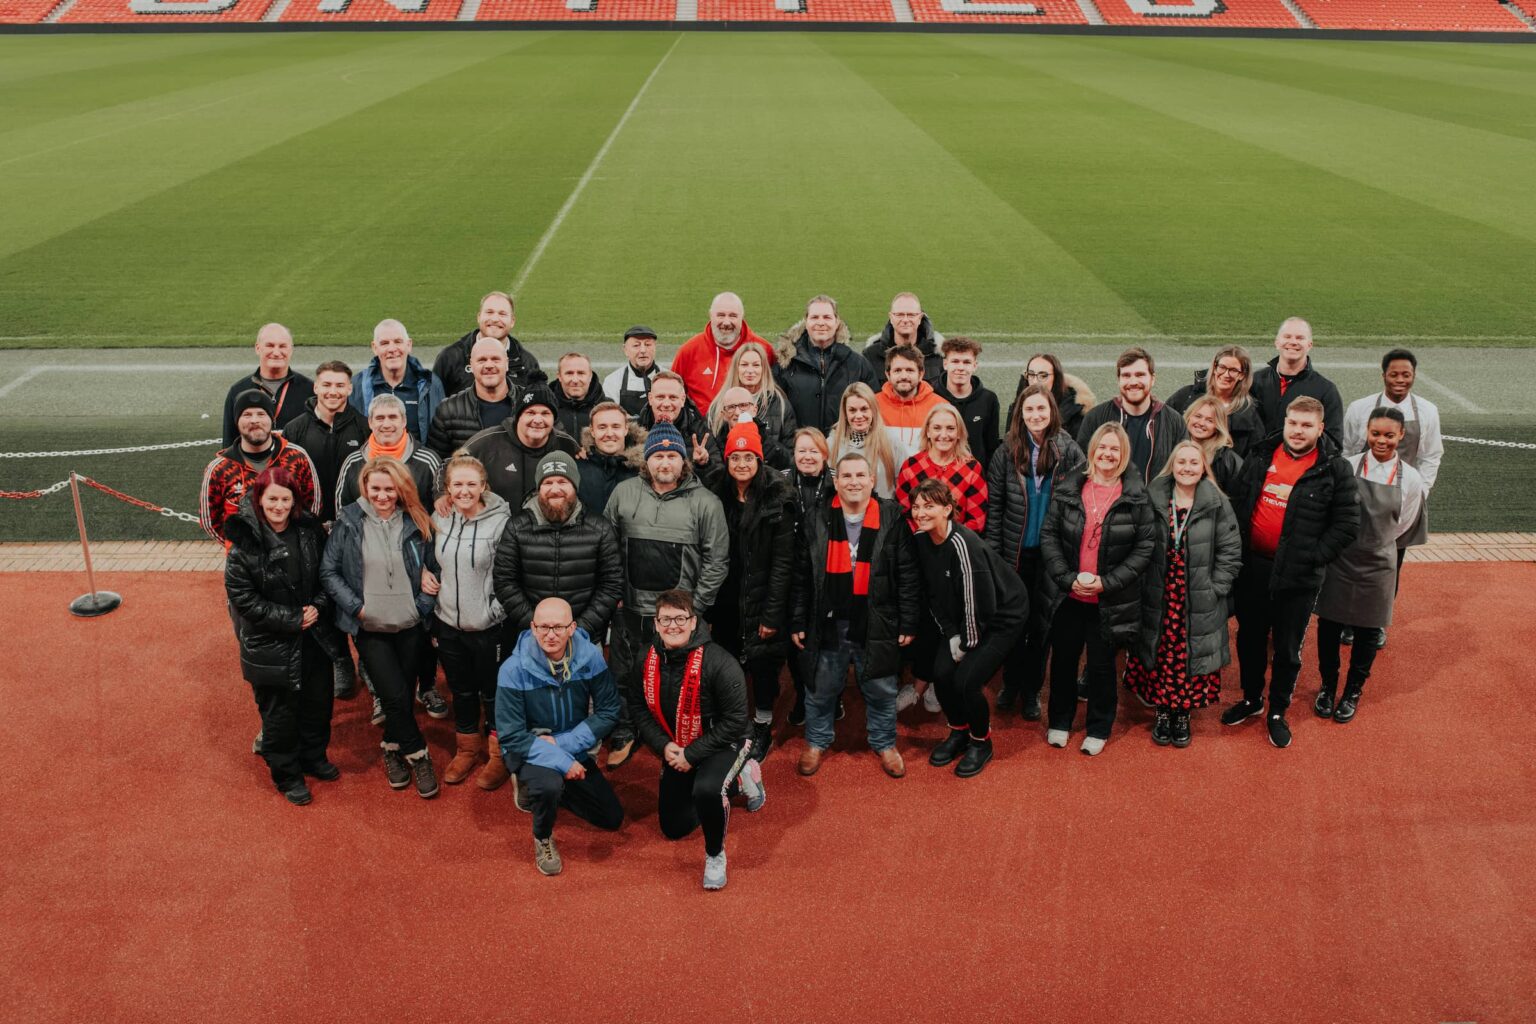 Manchester united hosts first ever sleepout at old trafford in support of vulnerable young people this winter